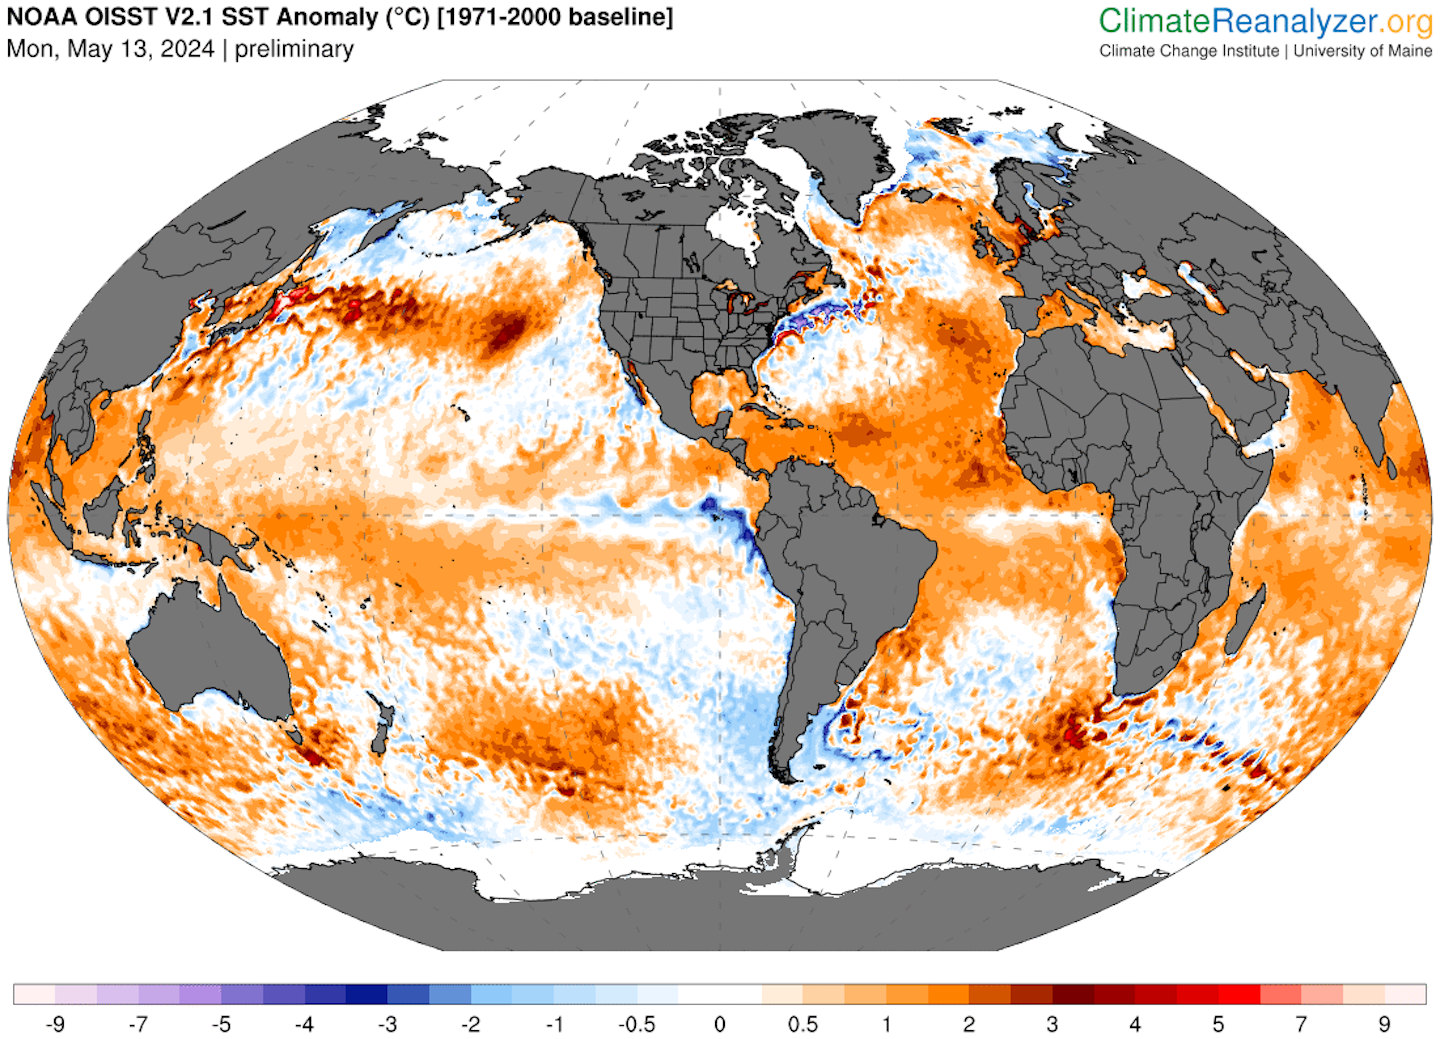 A map shows exceptional warmth across the Atlantic and Indian Oceans in particular.